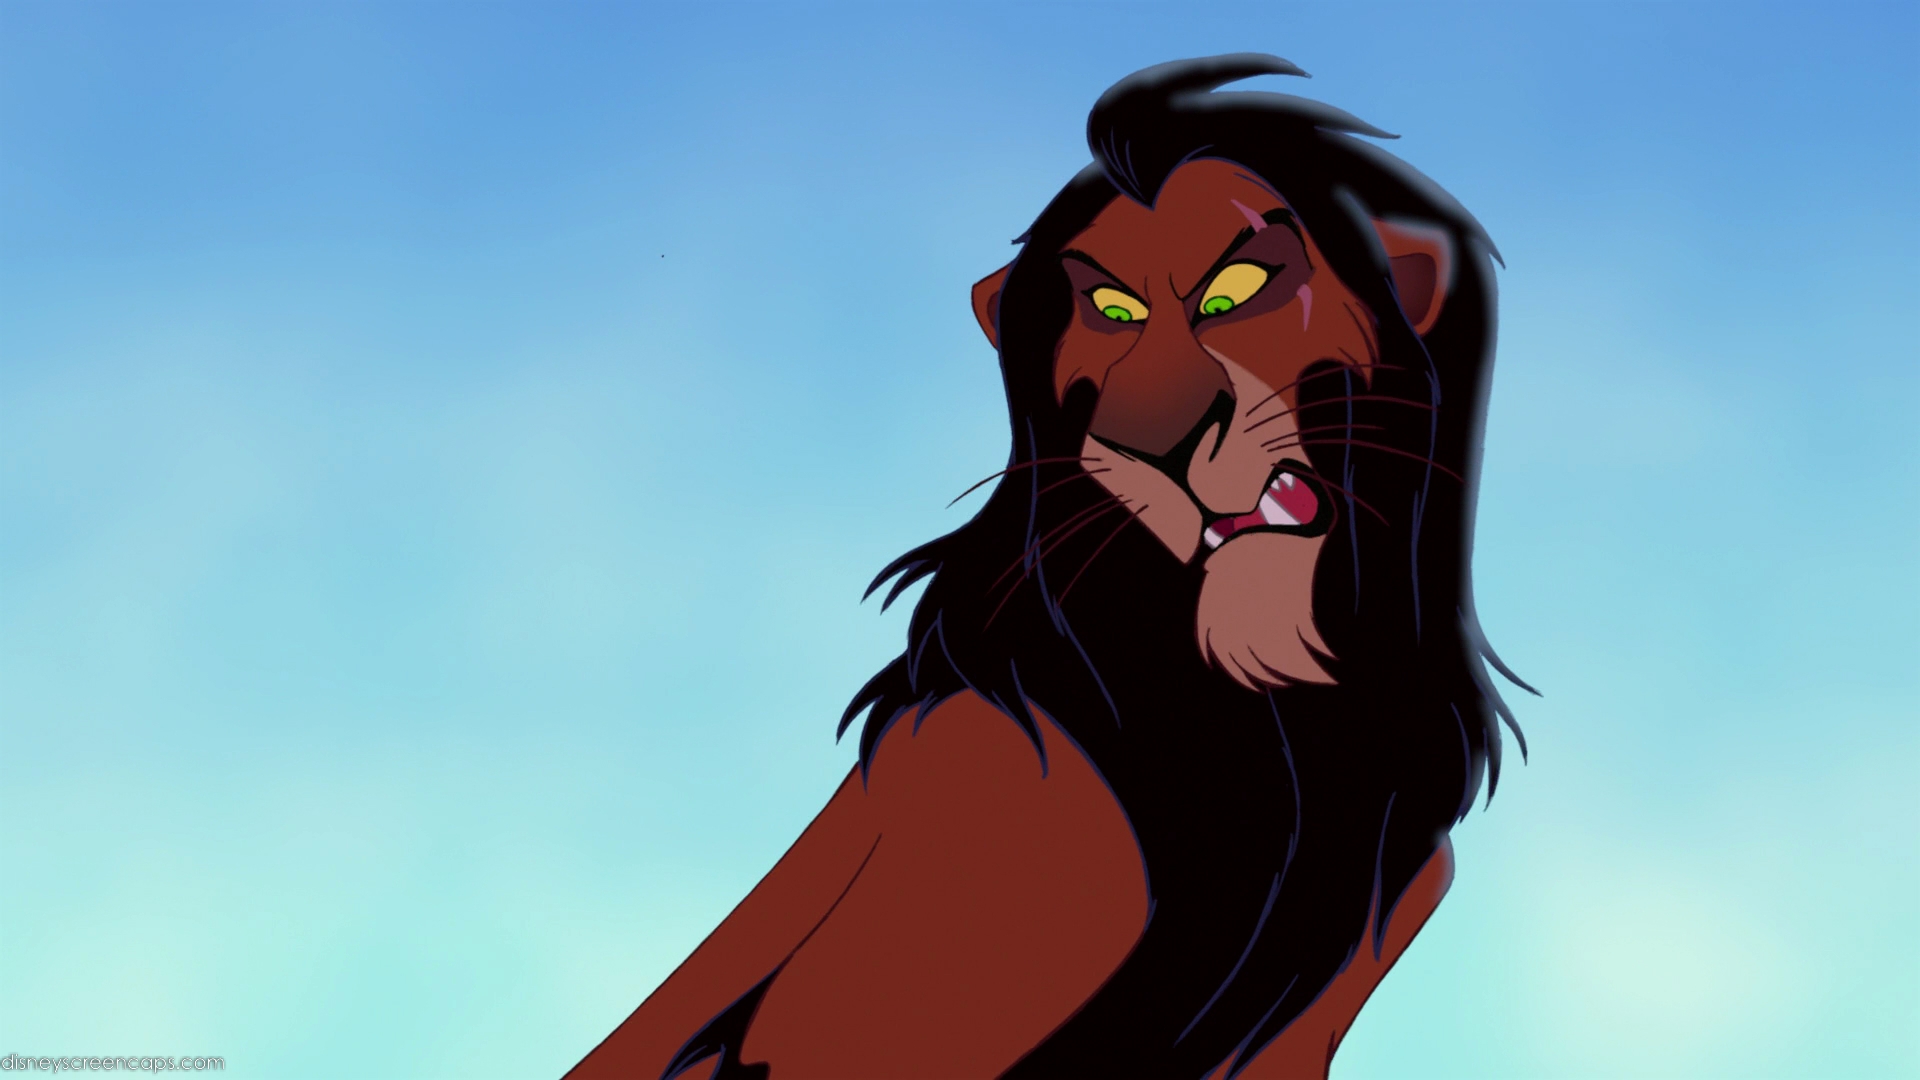 Scar from The Lion King - wide 9